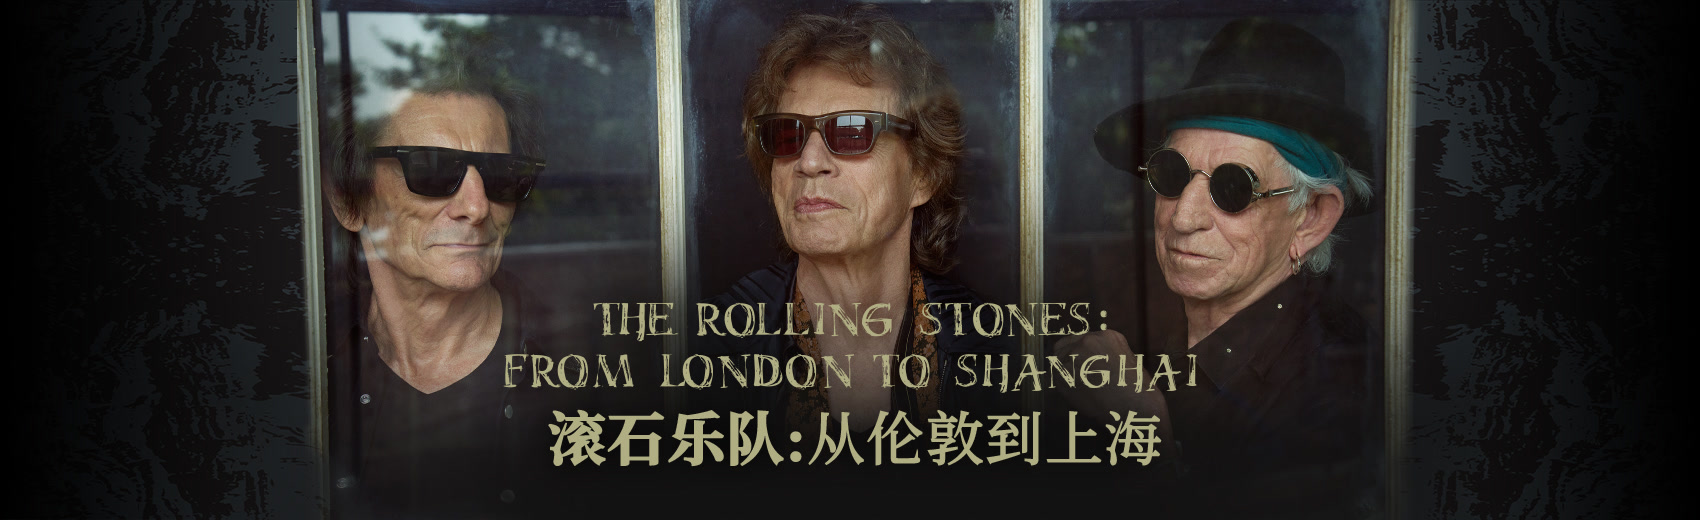 The Rolling Stones - Rolling Stones - From London To Shanghai 